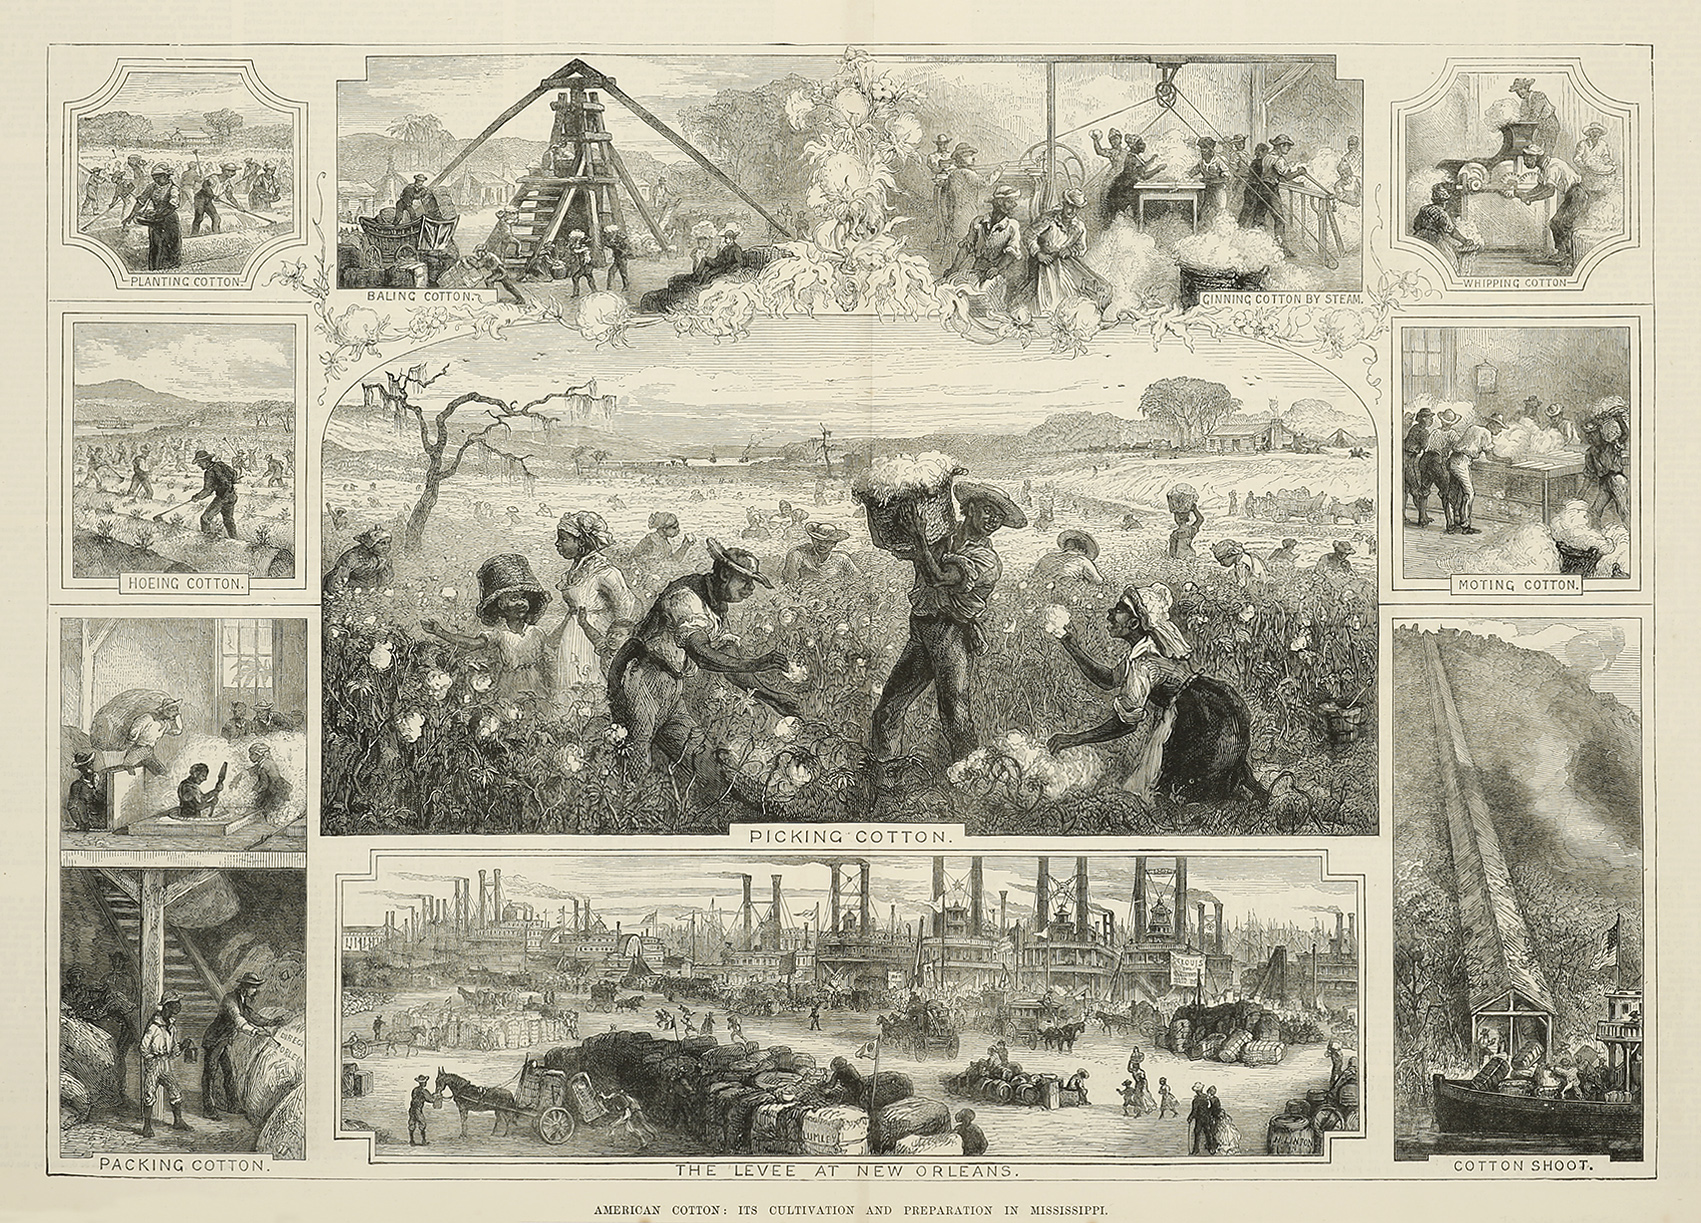 American Cotton: Its Cultivation and Preparation in Mississippi. - Antique View from 1881